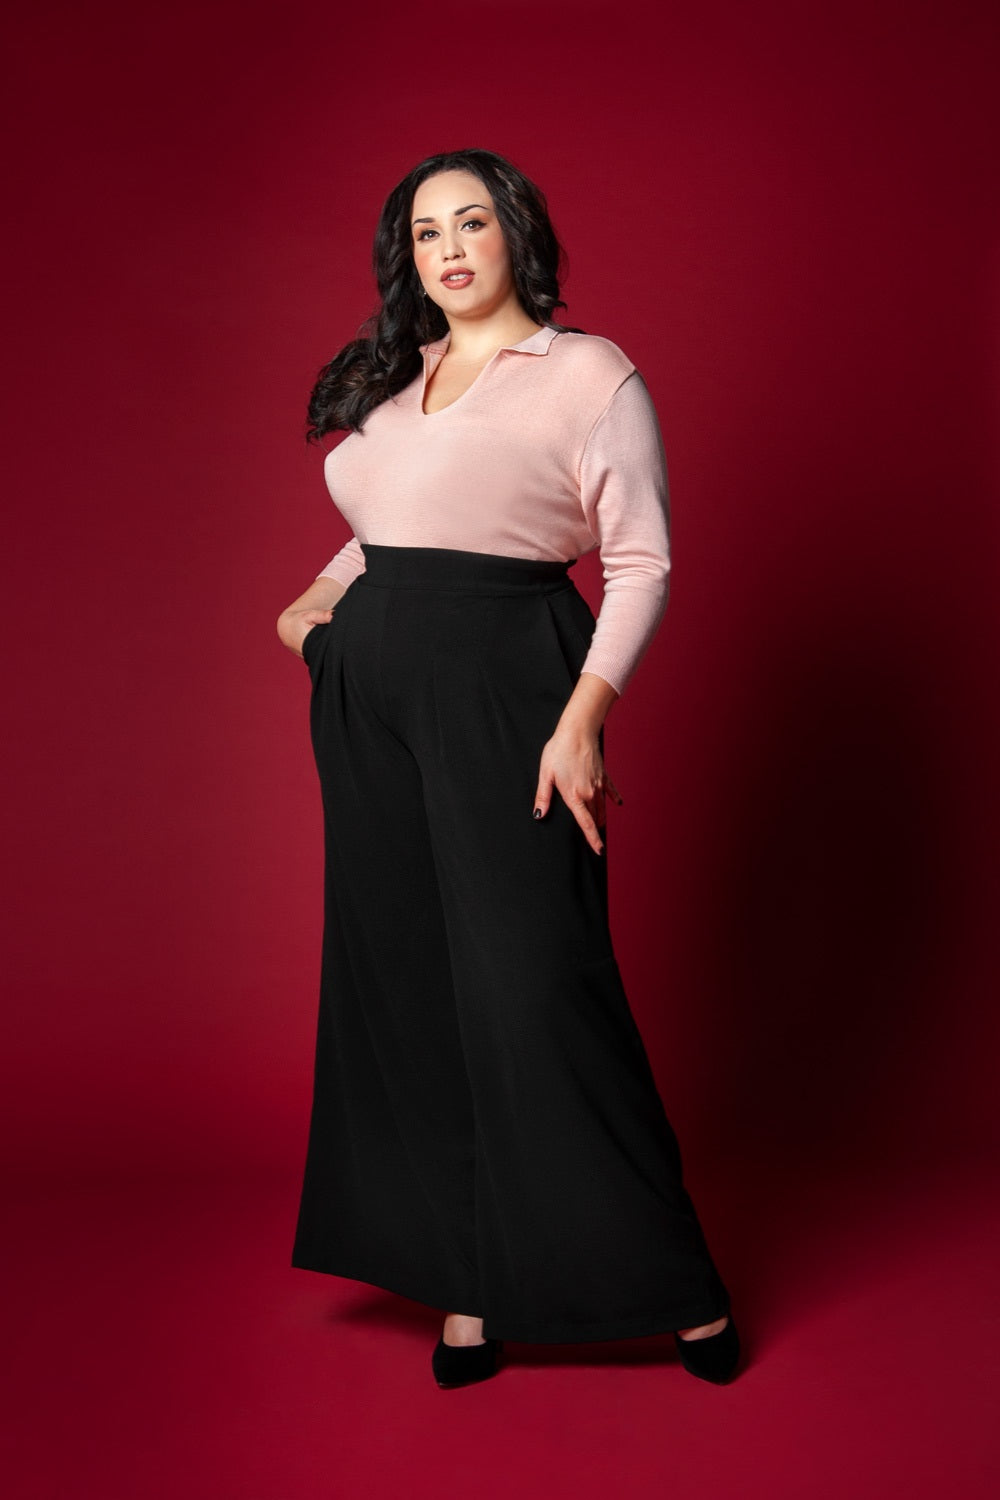 Pinup Girl Clothing model Coco Lamarr poses in PUG brand favorite Dietrich vintage inspired wide leg trouser palazzo pants with pockets made of high quality stretch crepe in black 30" inch inseam